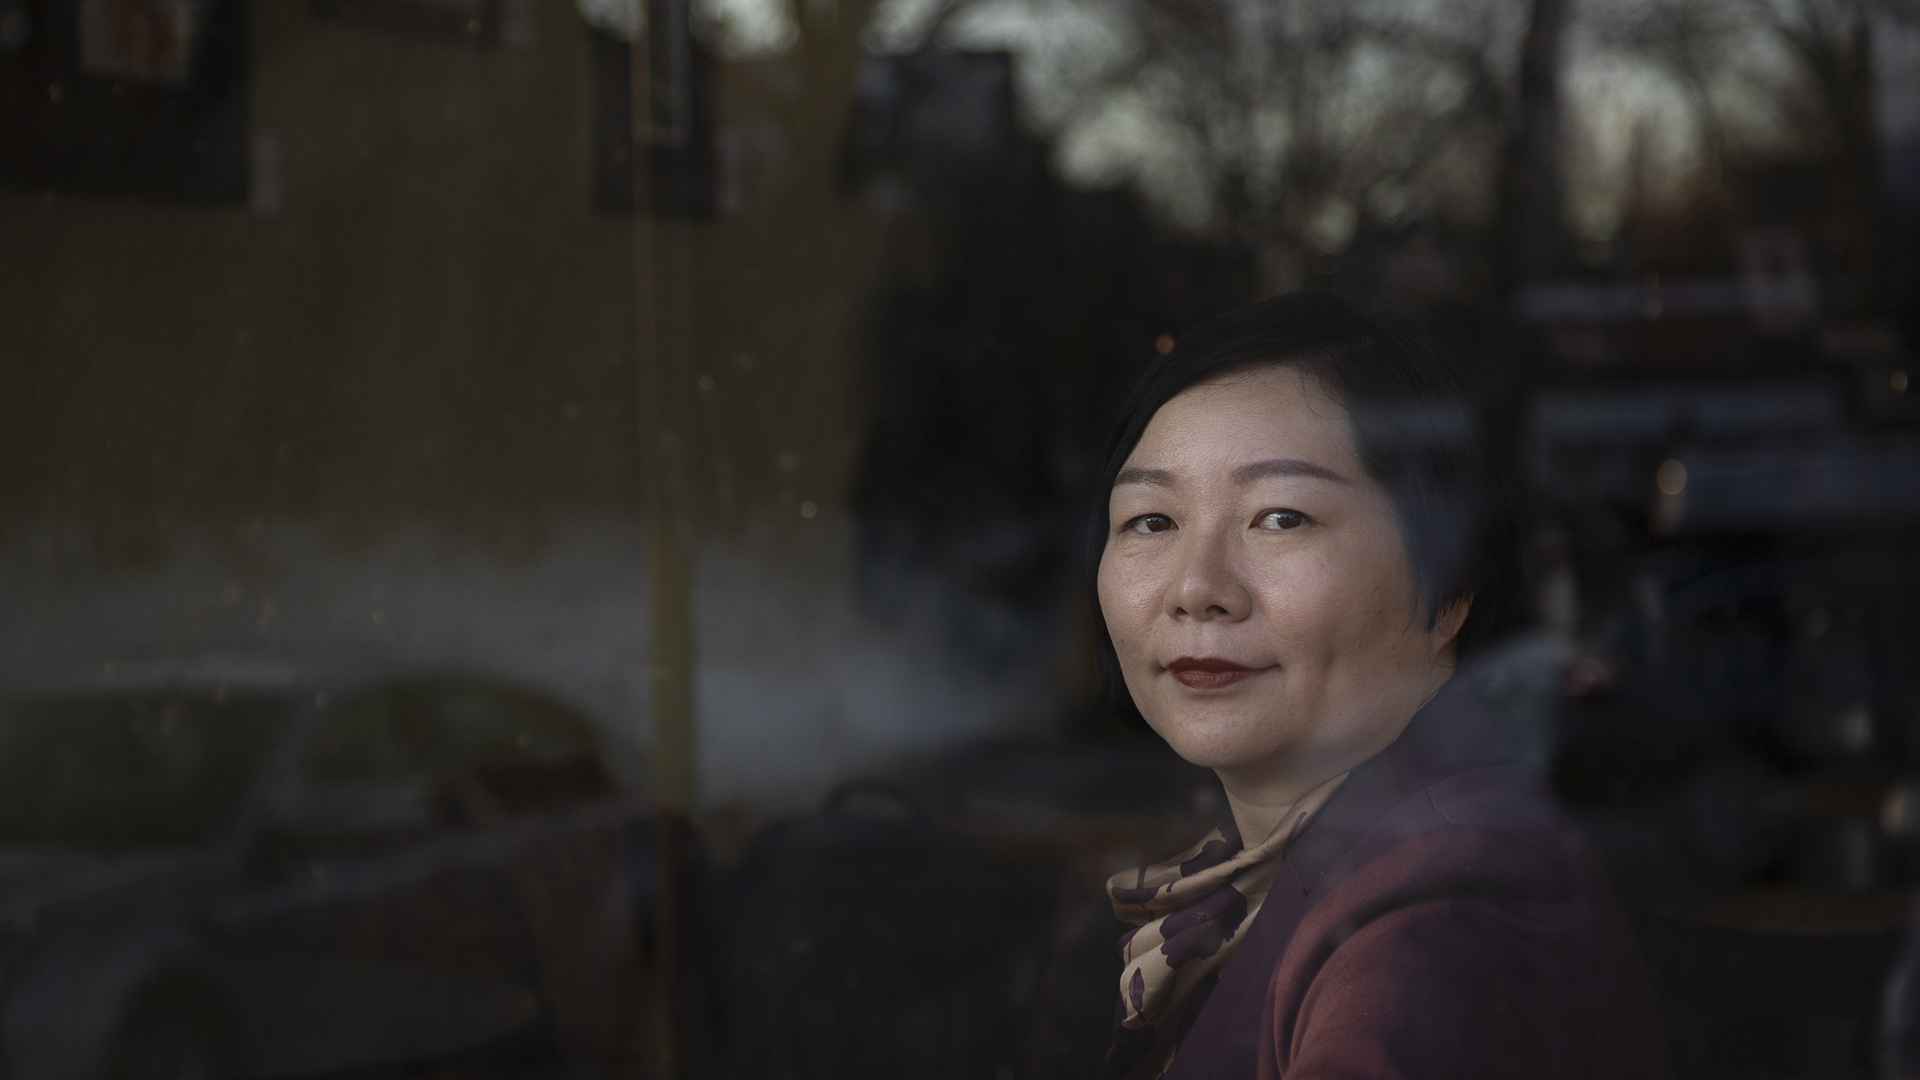 Shi Minglei sits inside a building and looks through a large plate-glass window, with parked cars and trees visible in its surface reflection.